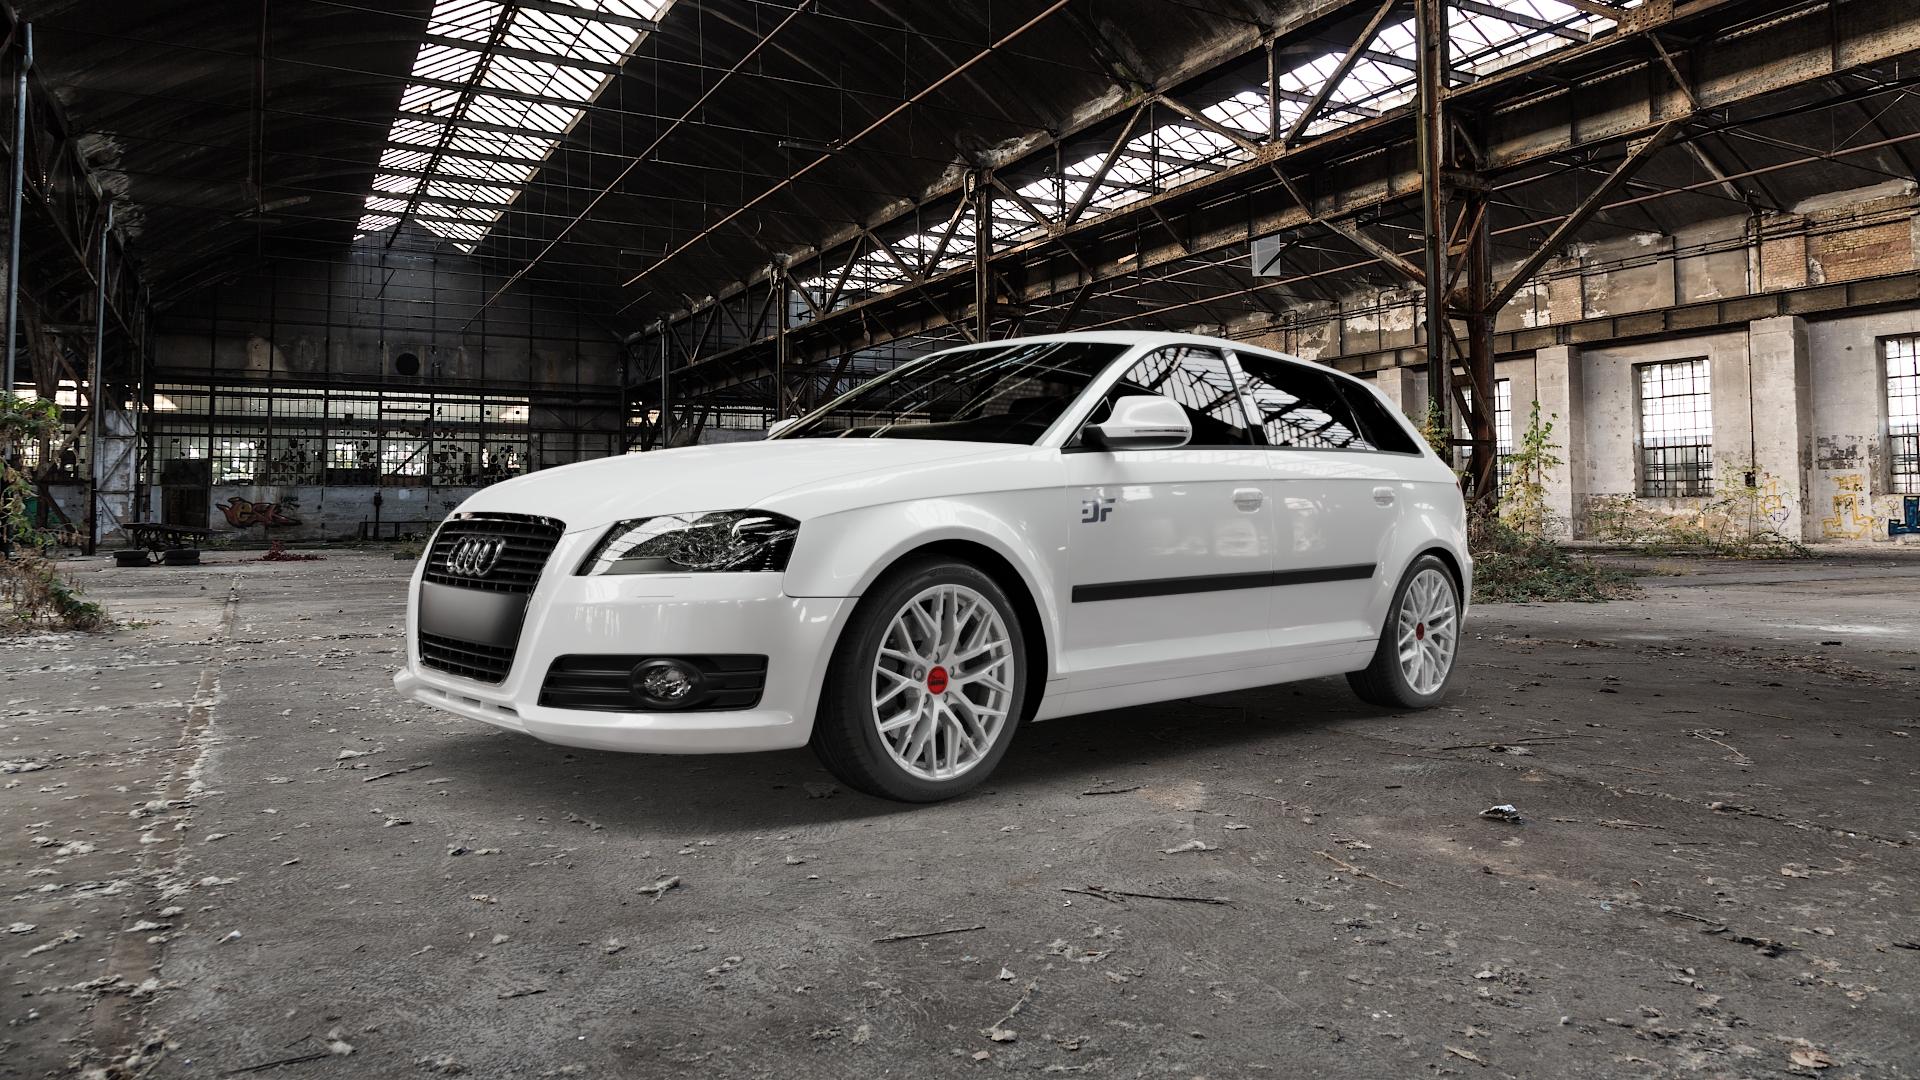 Audi A3 Type 8P 2,0l S3 quattro 195kW (265 hp) Wheels and Tyre Packages |  velonity.com